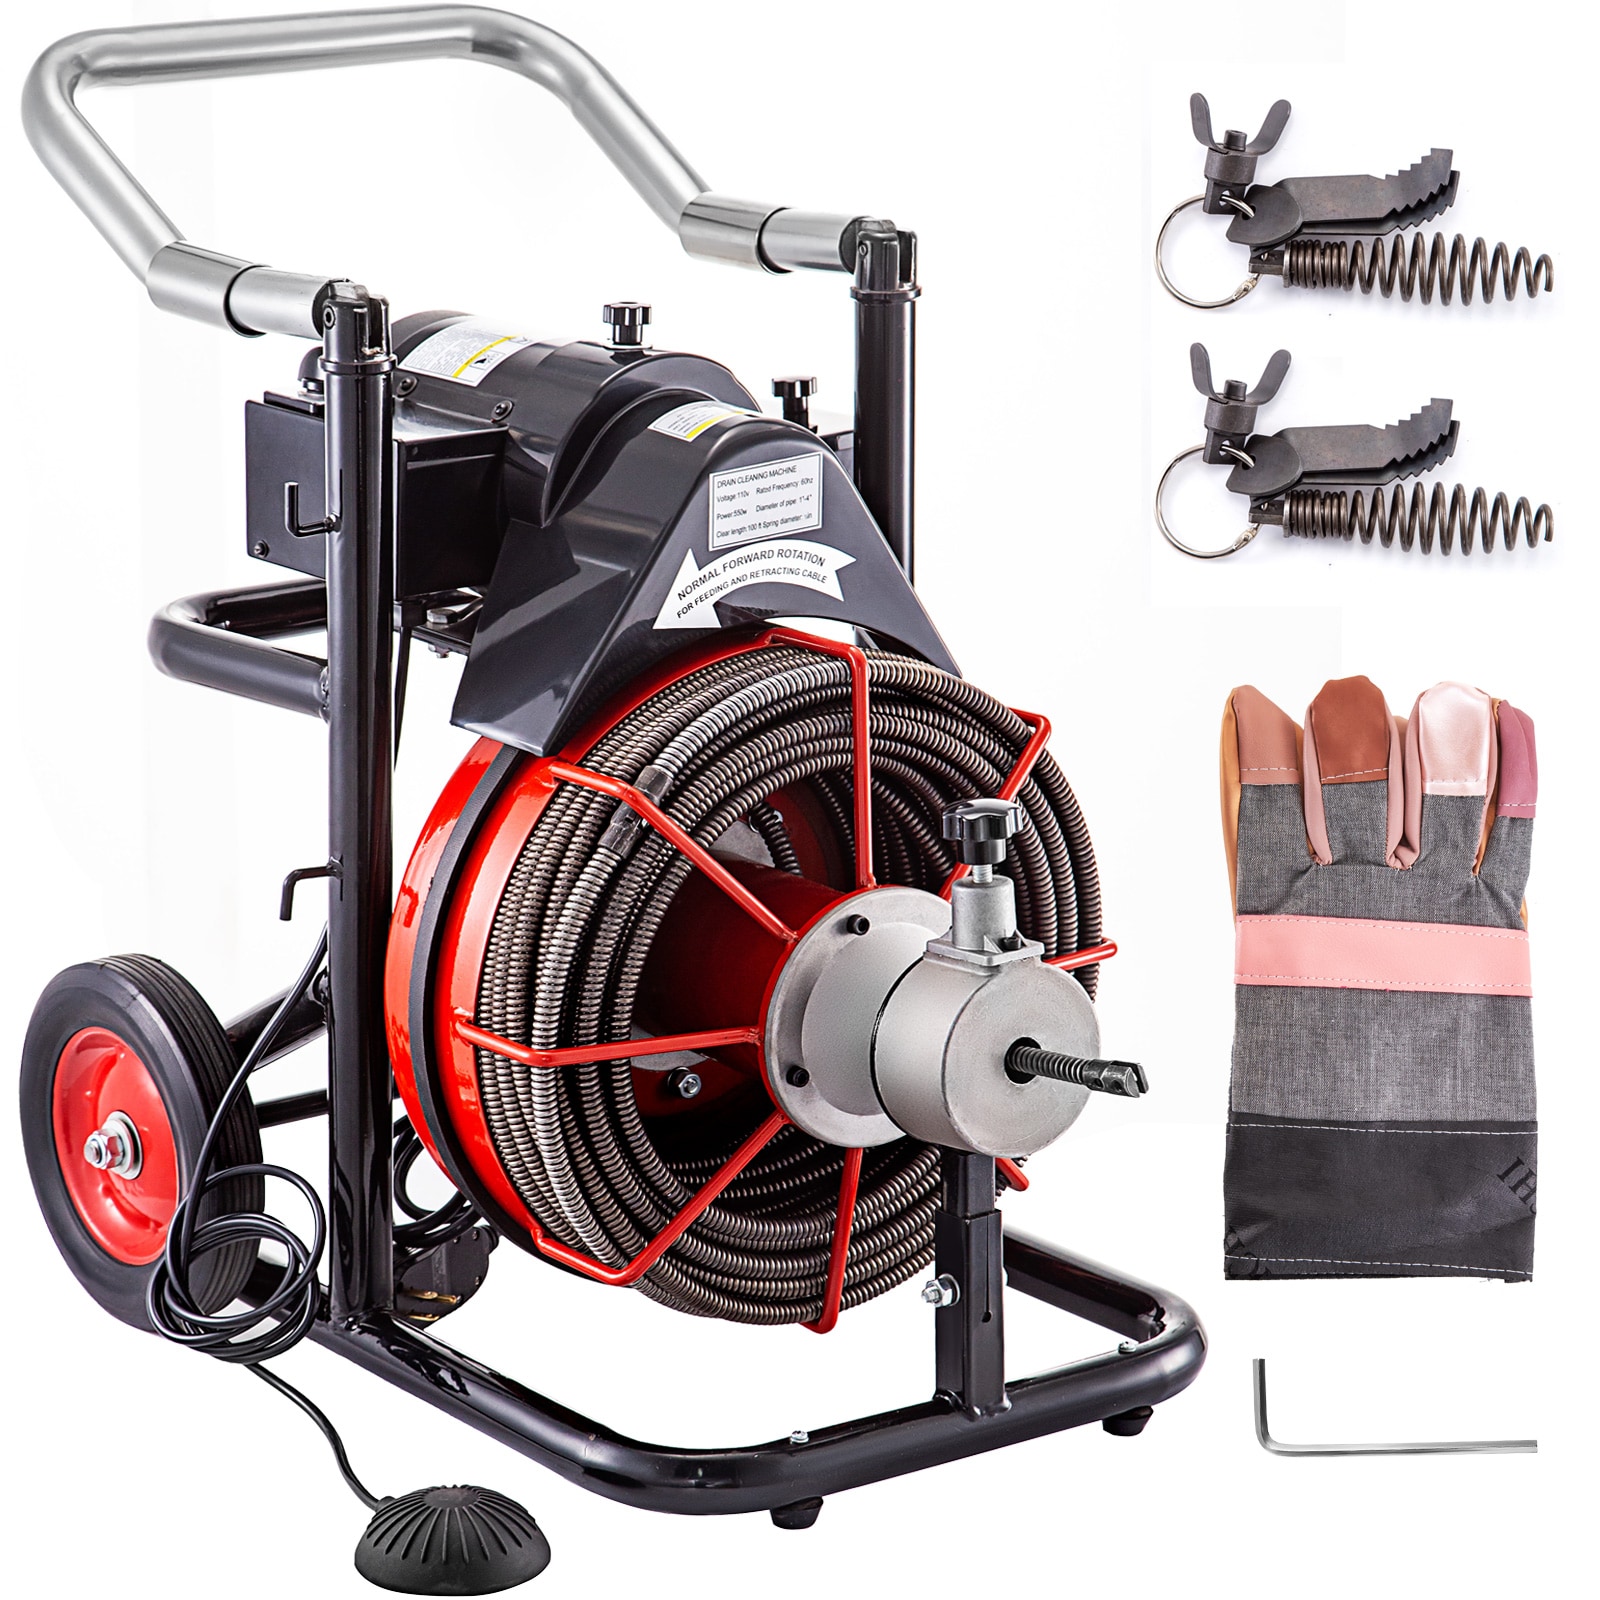 Cobra CP2040 Pro 50ft Music Wire Drain Cleaning Machine for sale online